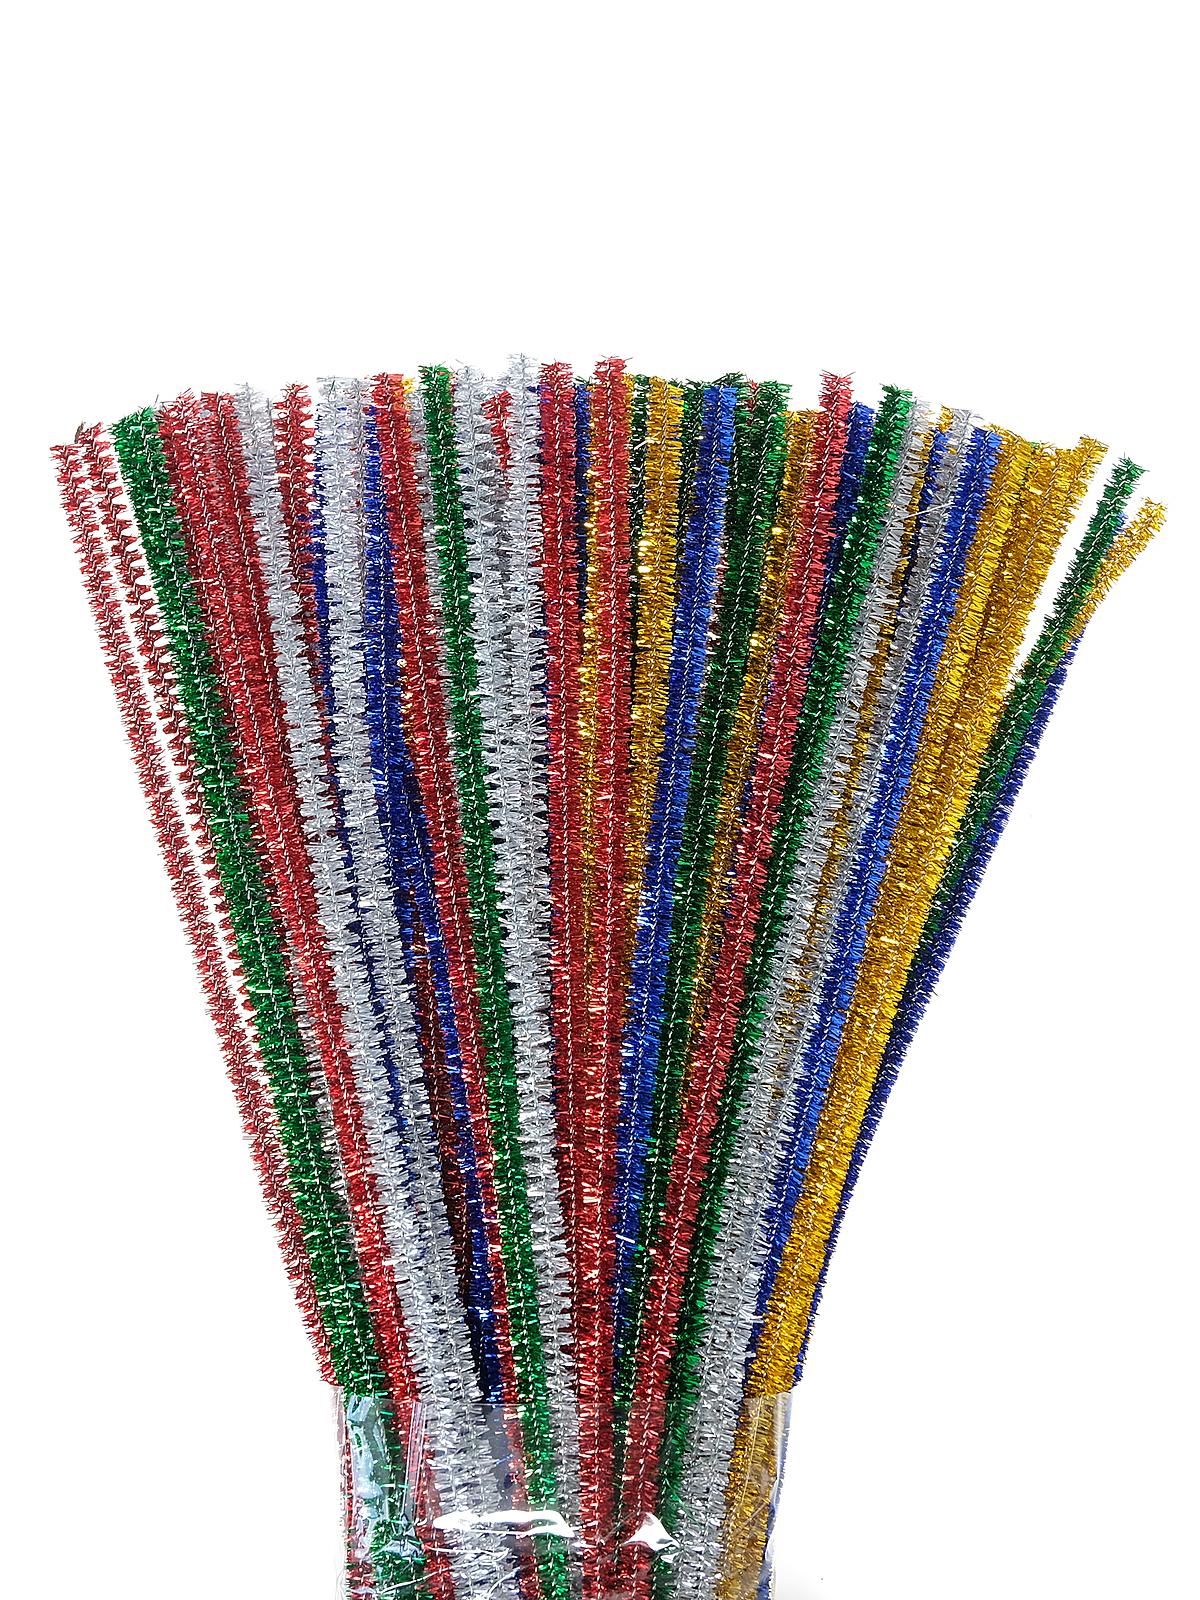 Chenille Stems 6 Mm X 12 In. 100 Pieces Sparkle